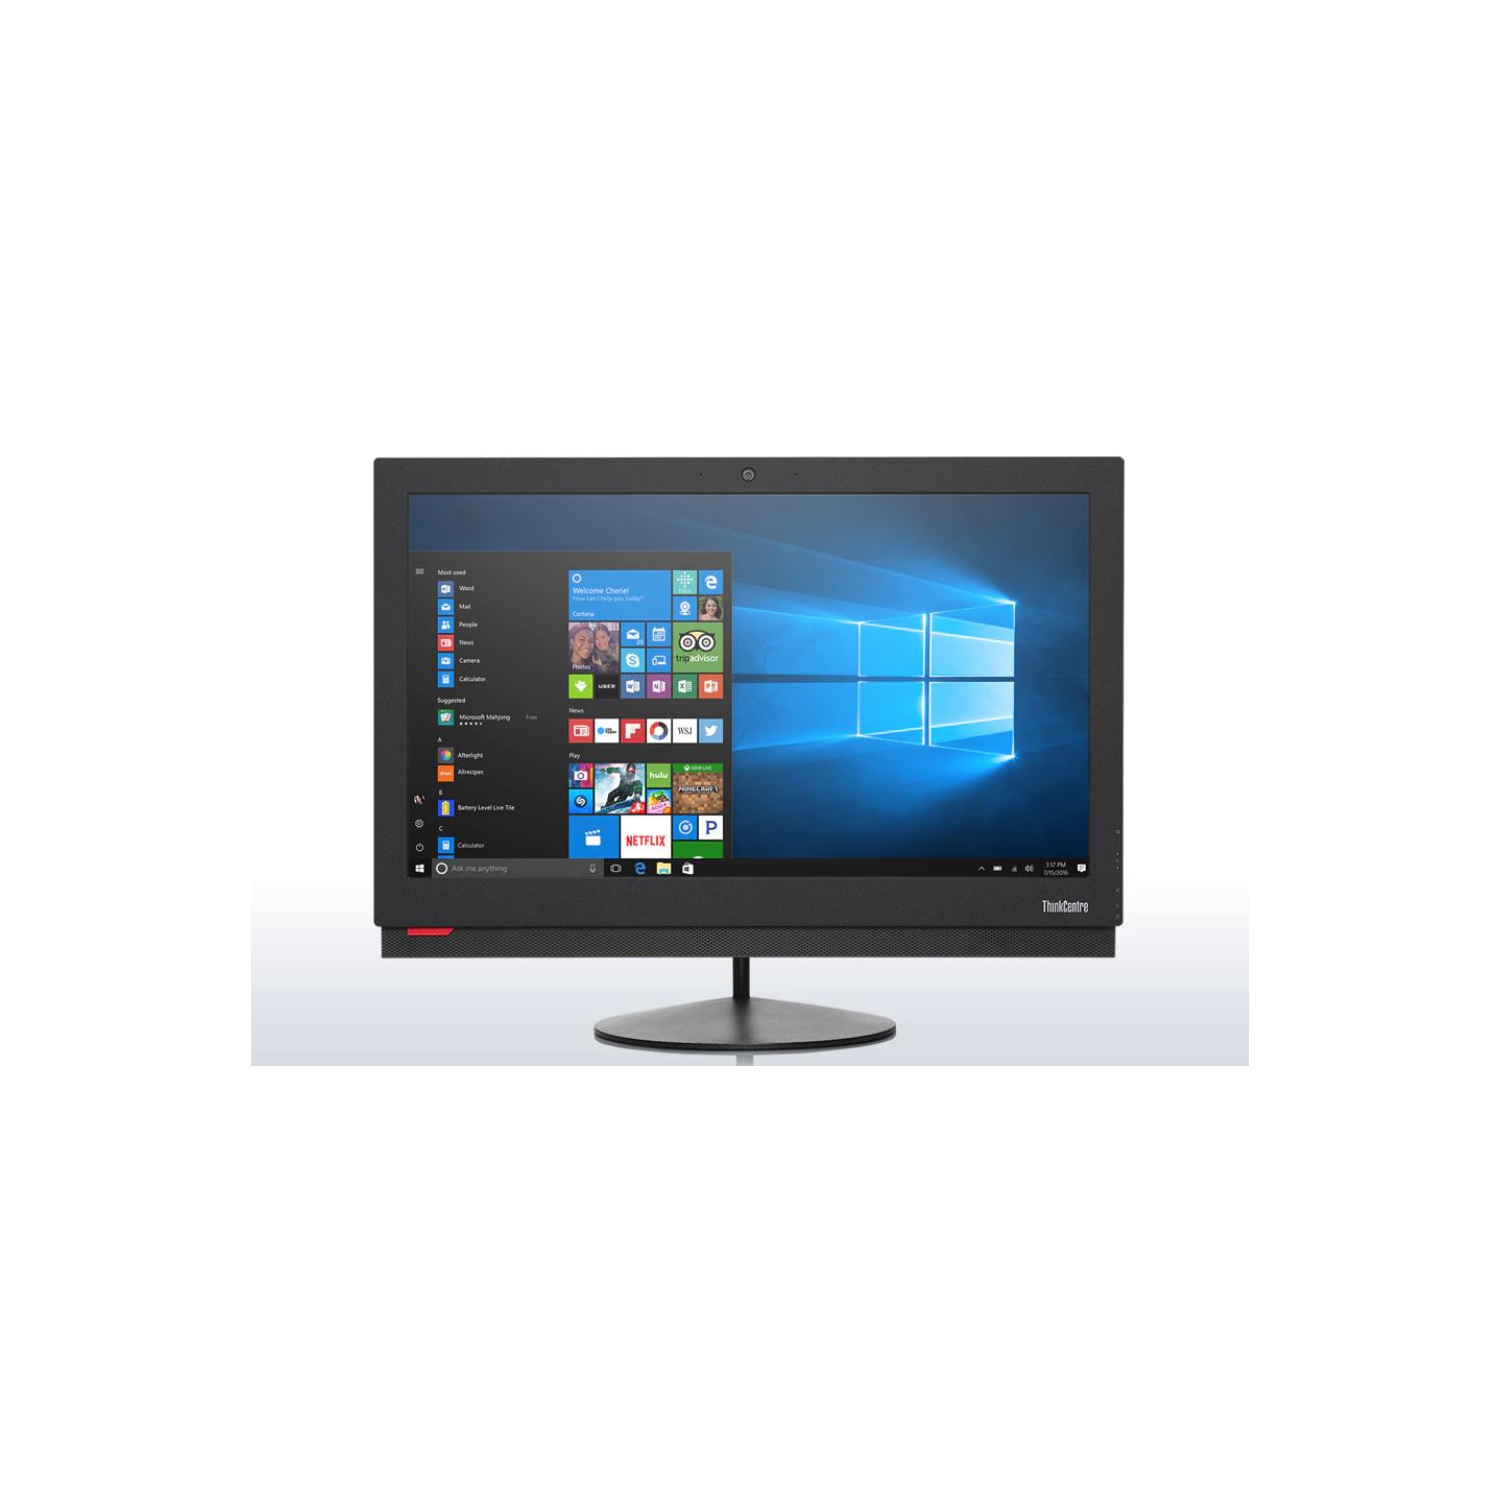 Refurbished (Good) - Lenovo ThinkCentre M900z AIO 23.8" Display, i5-6500 3.2Ghz, 8GB RAM, 512GB SSD, Webcam, Windows 10 Pro, Keyboard & Mouse not included